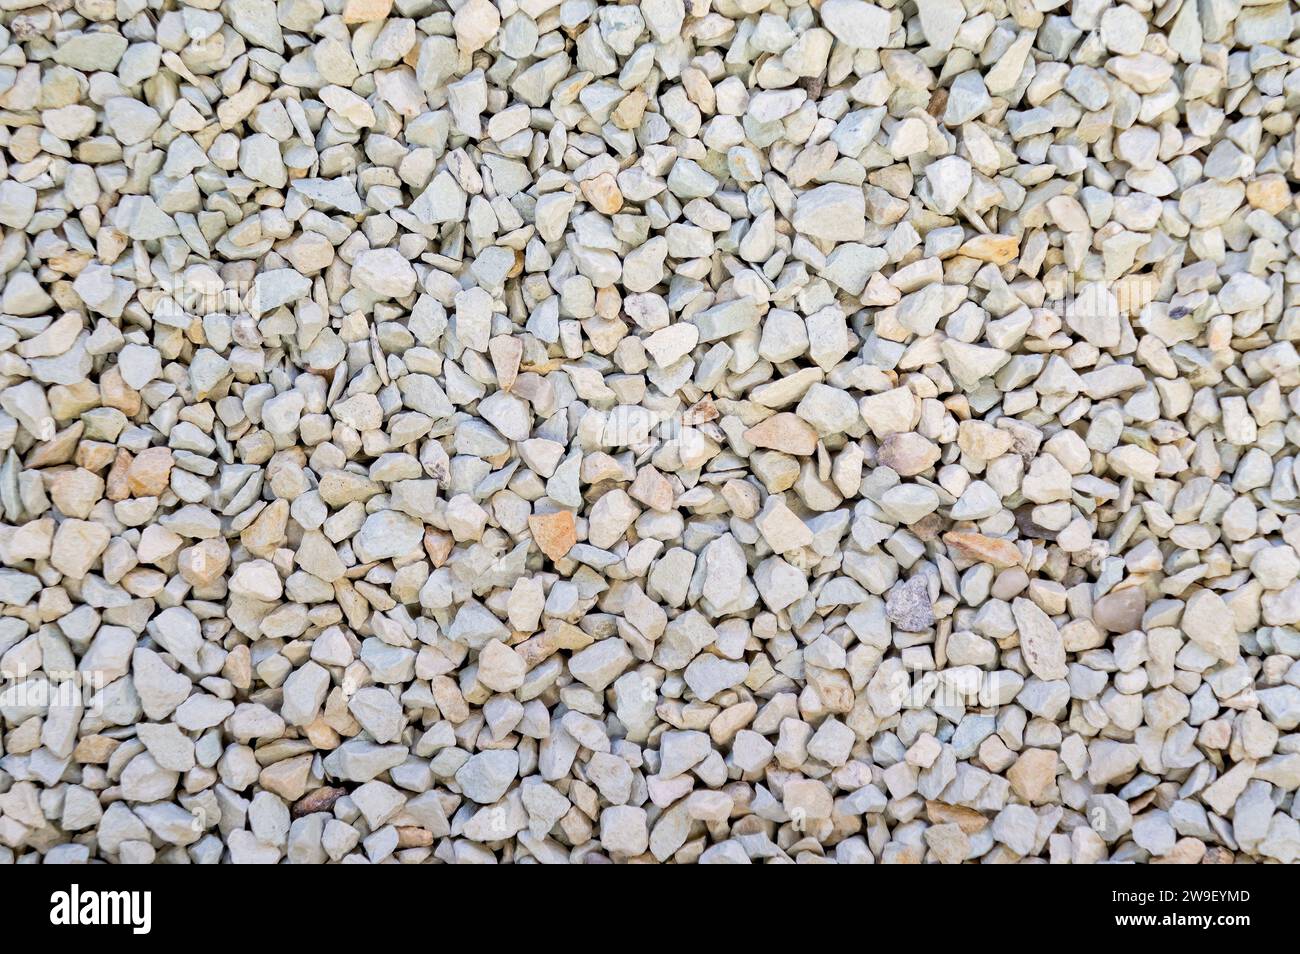 Finely ground zeolite mineral stones. A spread of small pebble-like fragments. Stock Photo